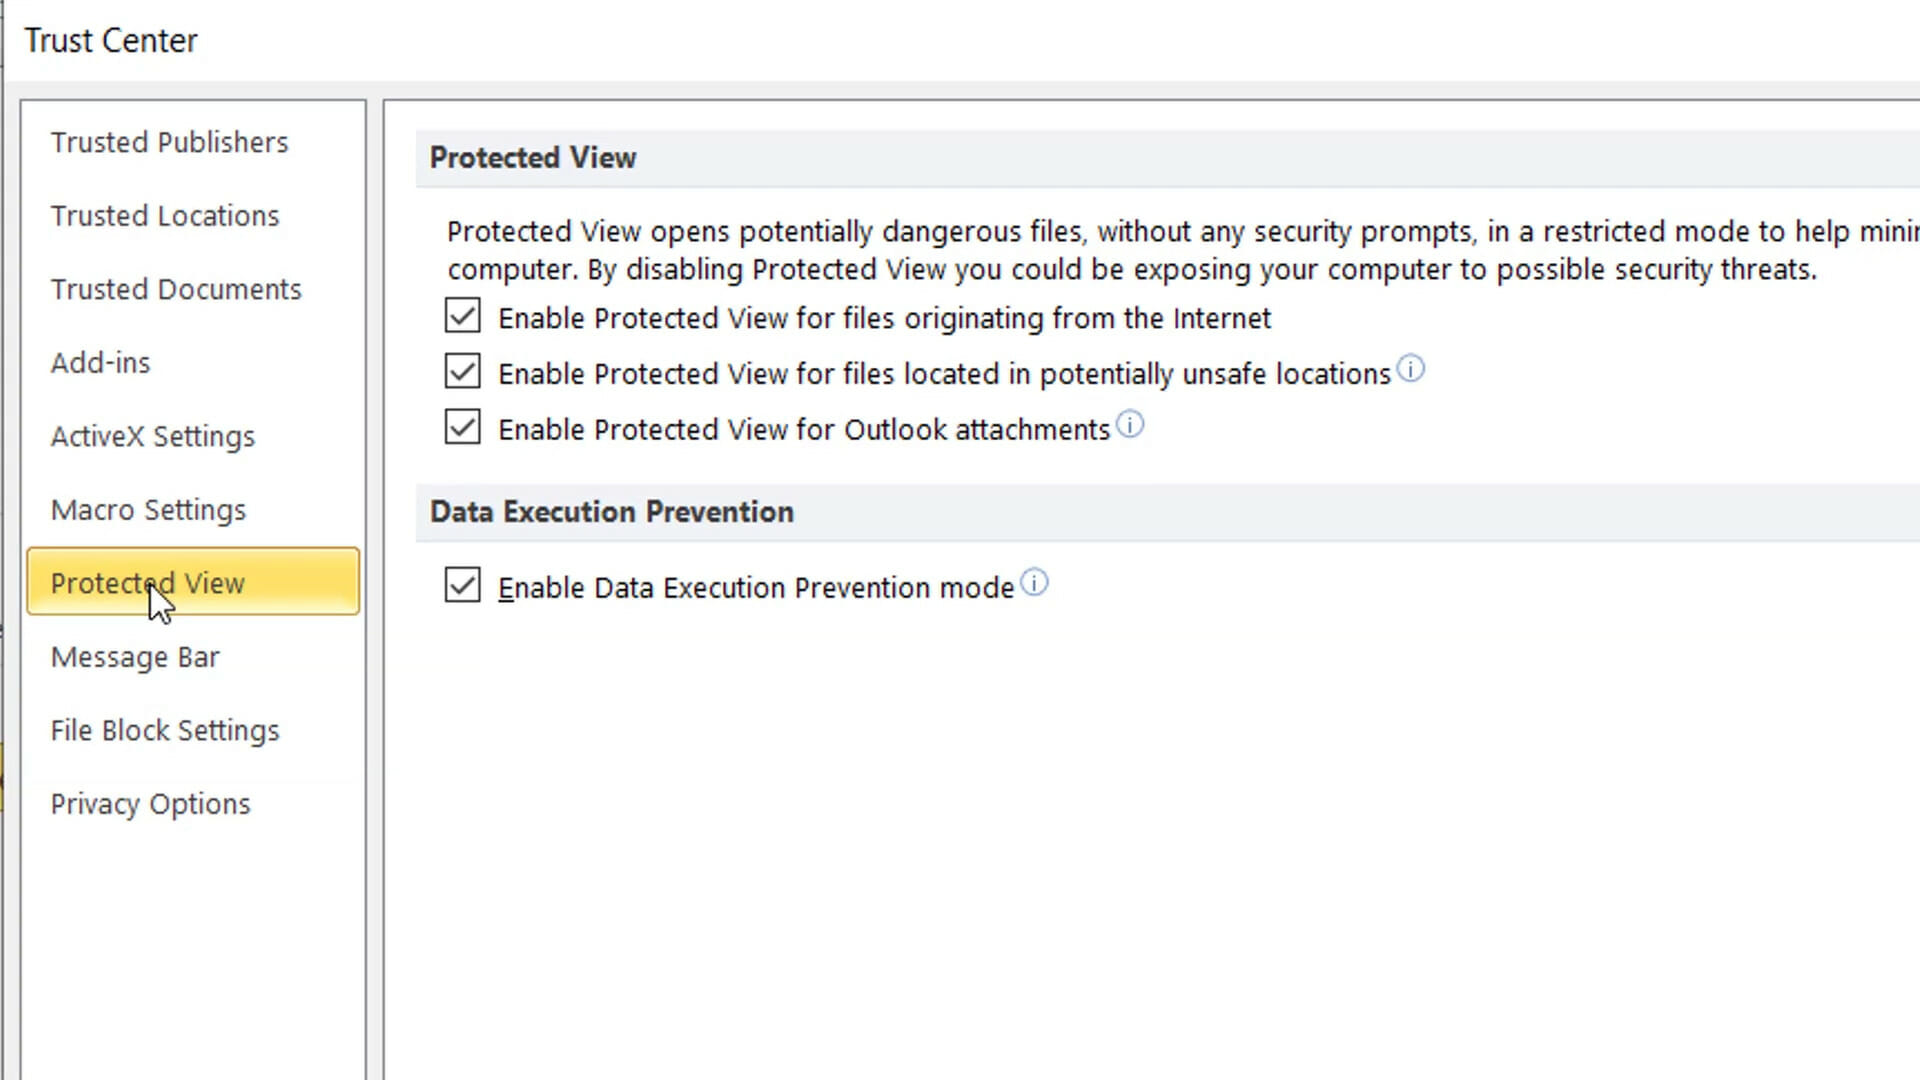 Protected View options the file couldn't open in Protected View